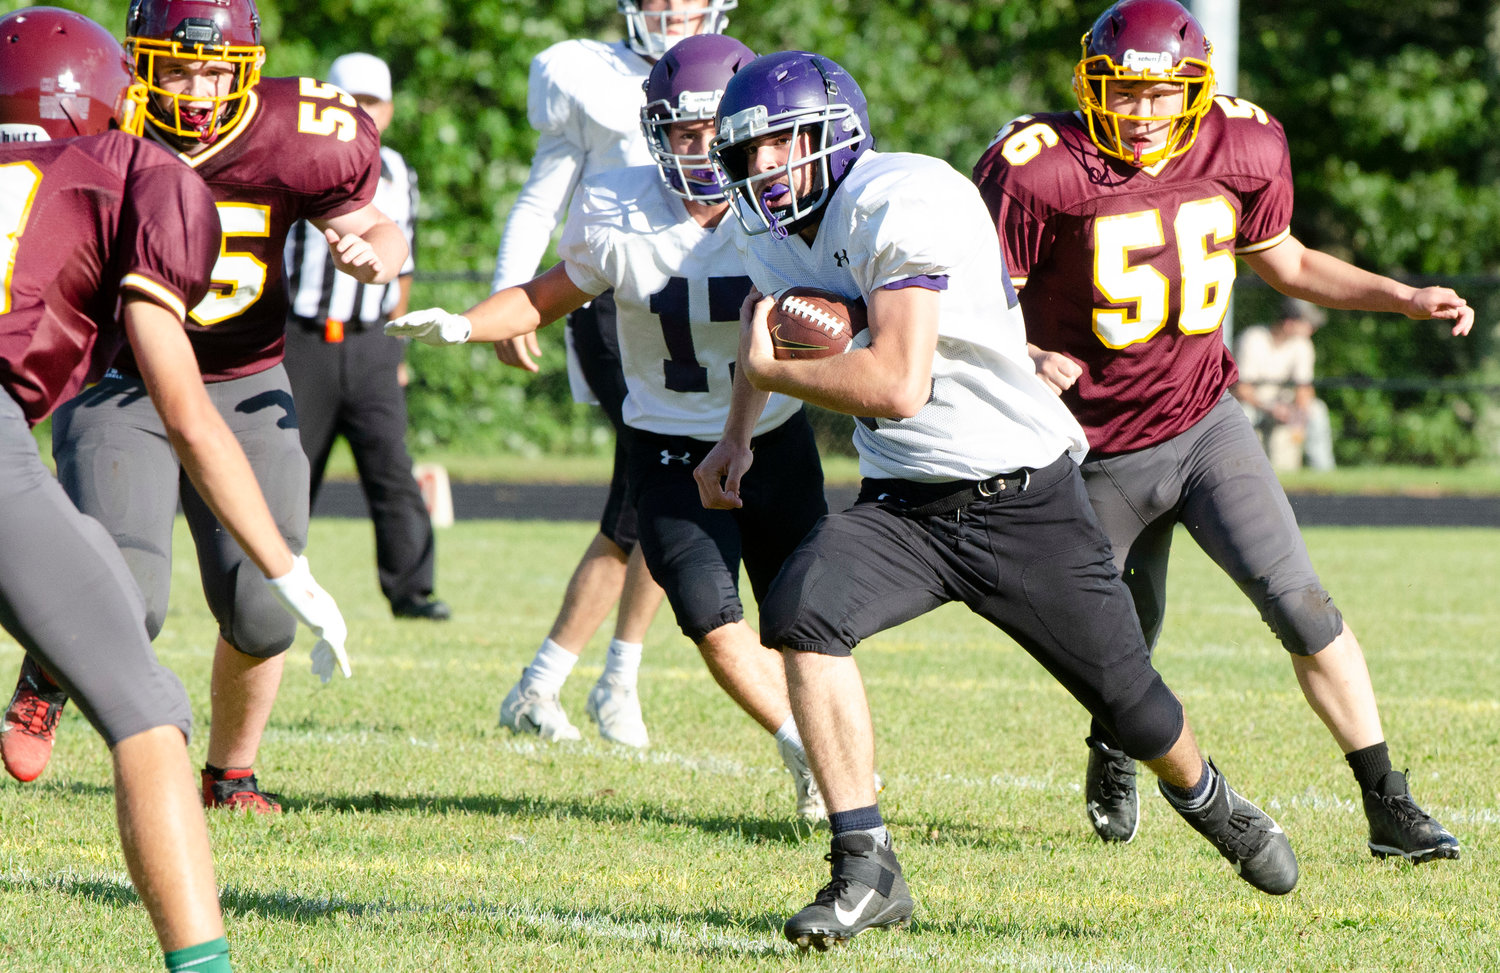 Mt. Hope senior running back Hunter Kavanagh heads up field for a gain in the first quarter.